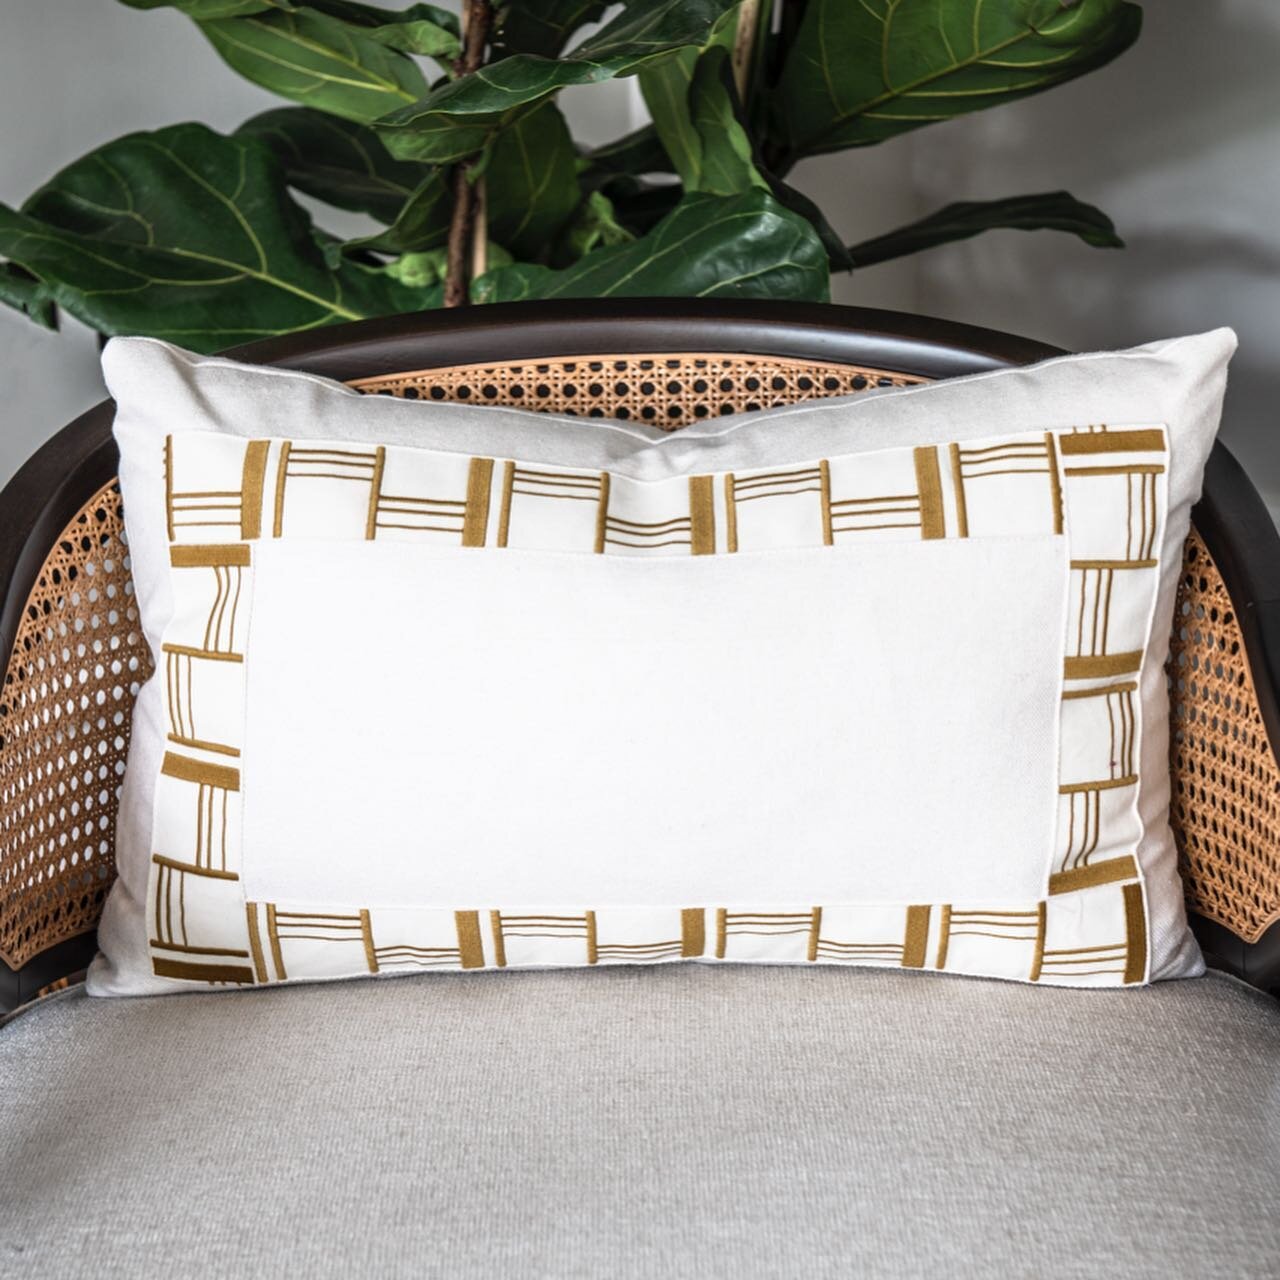 We love designing details, with  scatter cushions being one of our favourite room accessories to invest thought on. Selecting these beautiful fabrics and decorative trims had us swooning over our morning cuppas. Swipe to see the raffia edging on thes